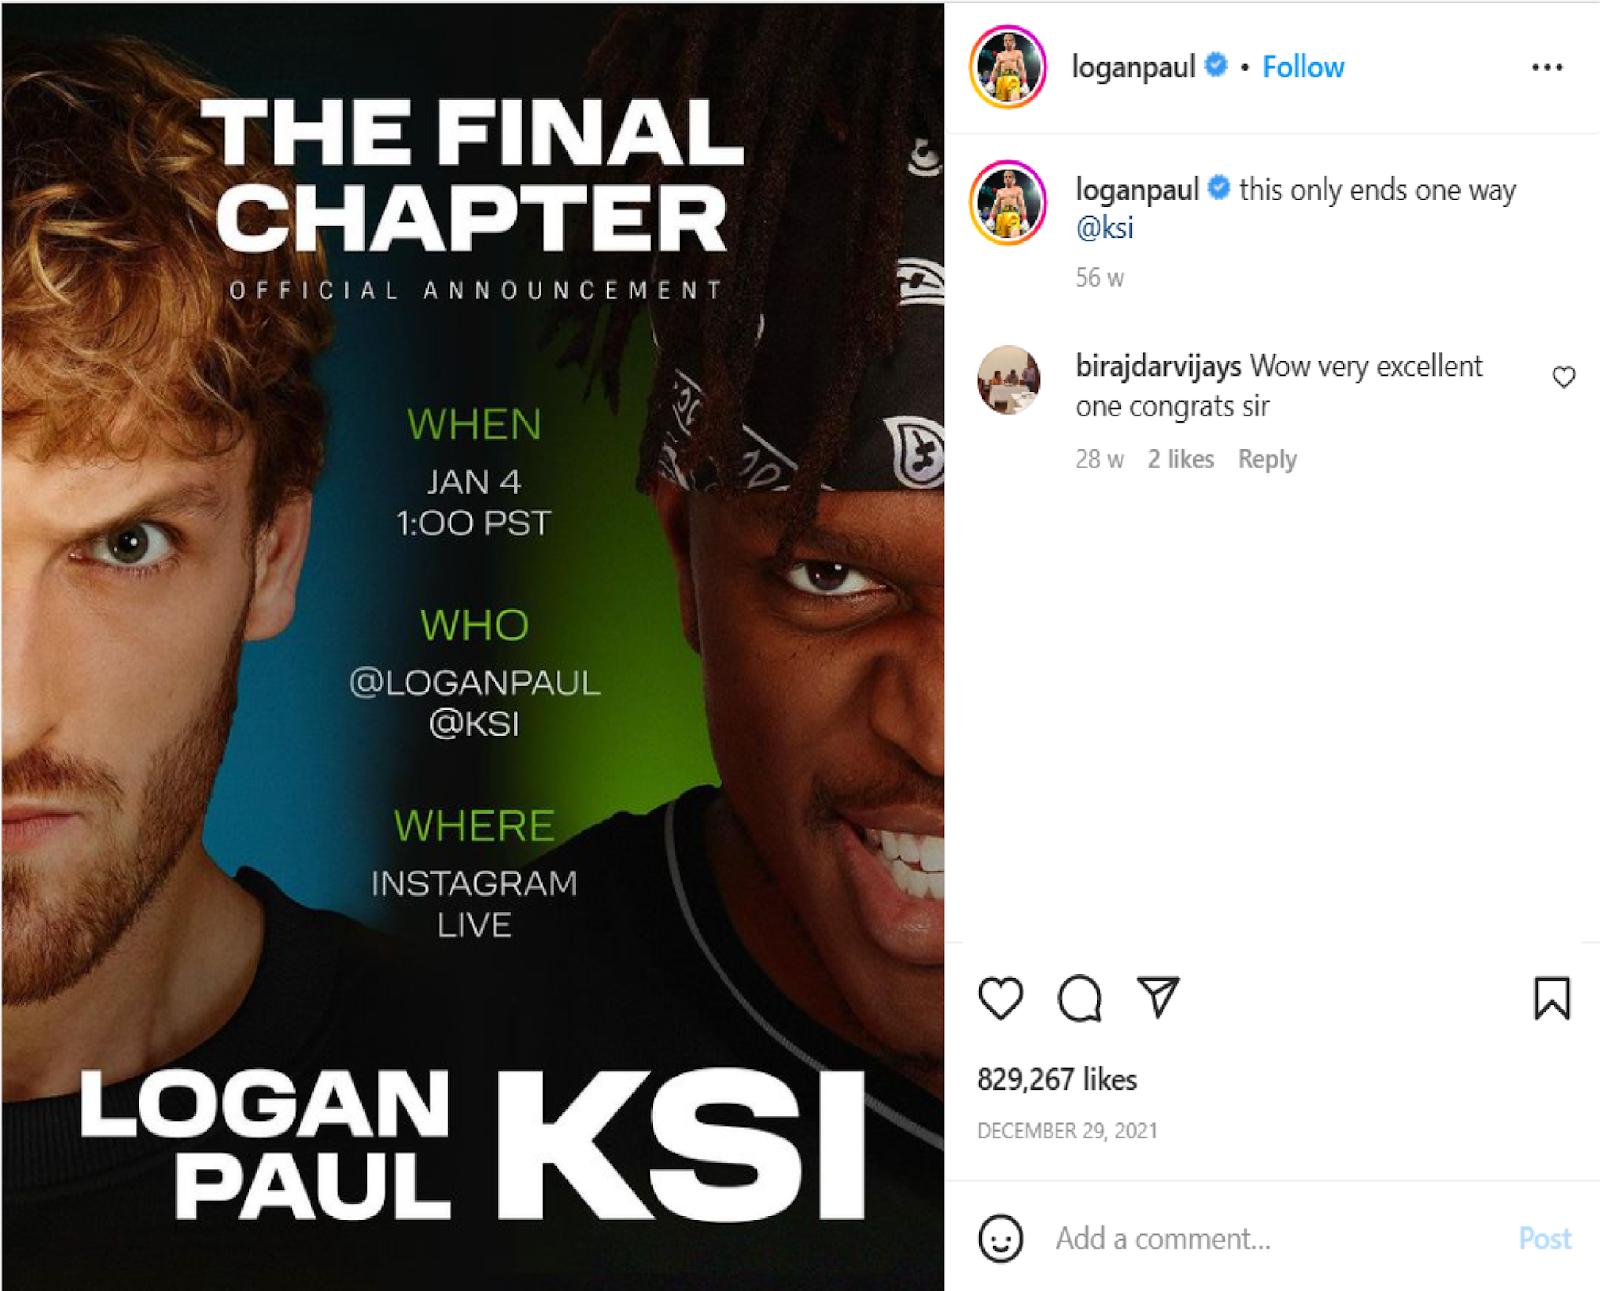 Logan Paul and KSI staring aggressively on a poster that is called 'The Final Chapter'.